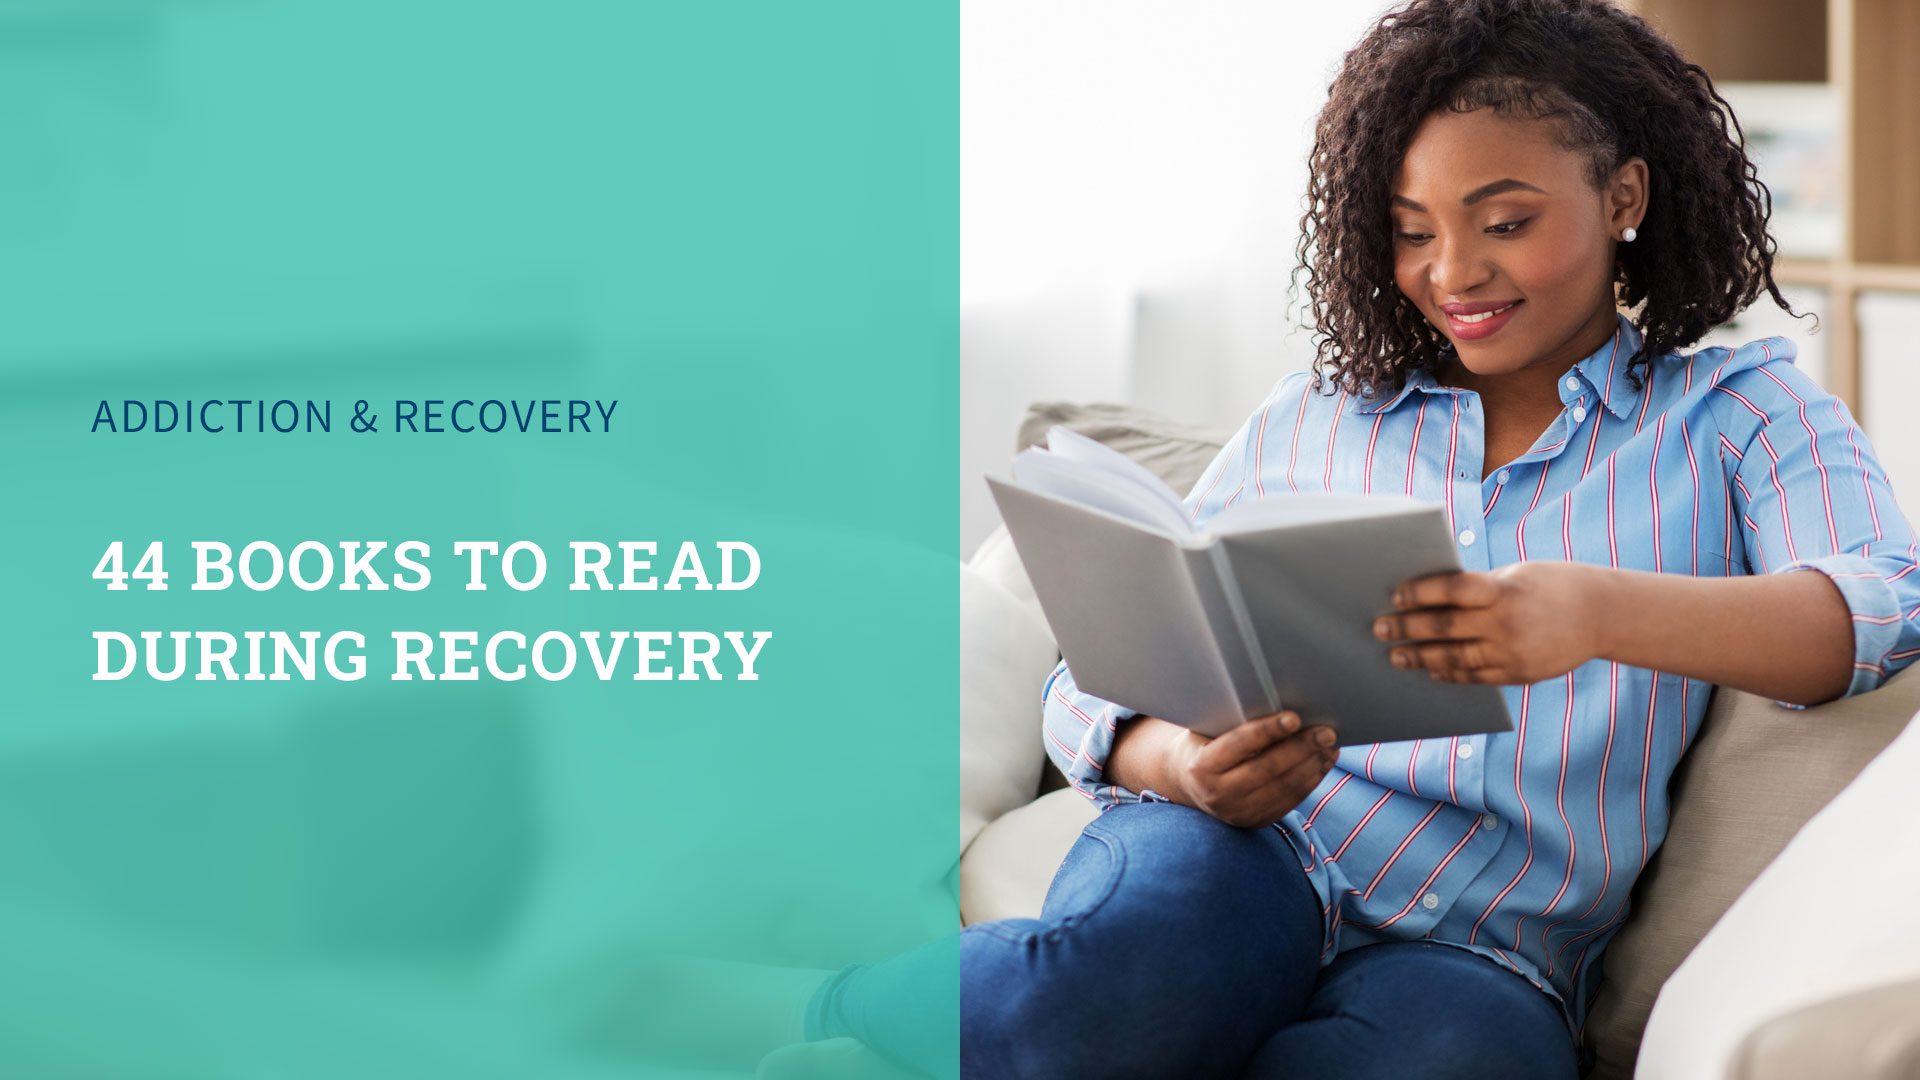 44 Books to Read During Recovery